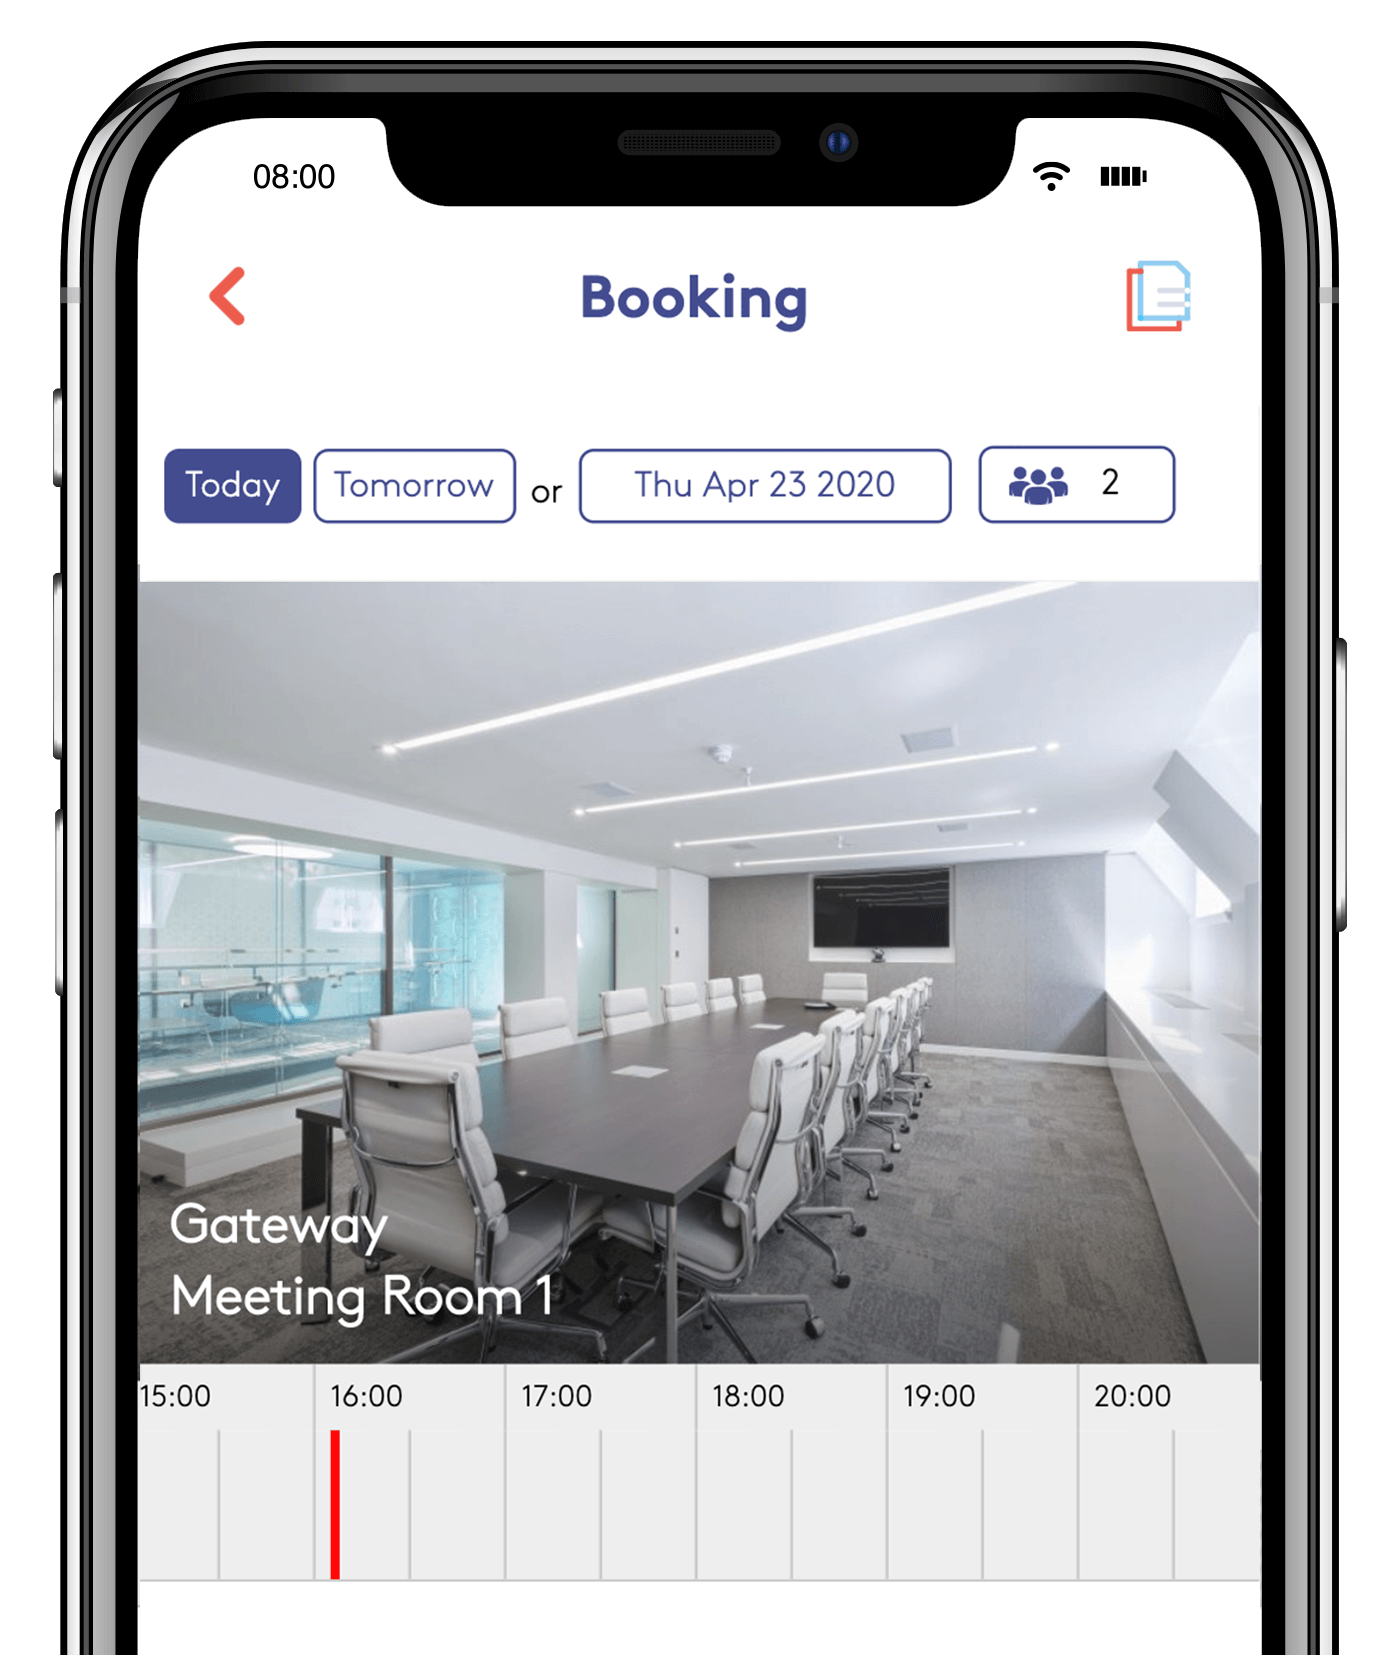 back to the office - meeting room booking system for space management